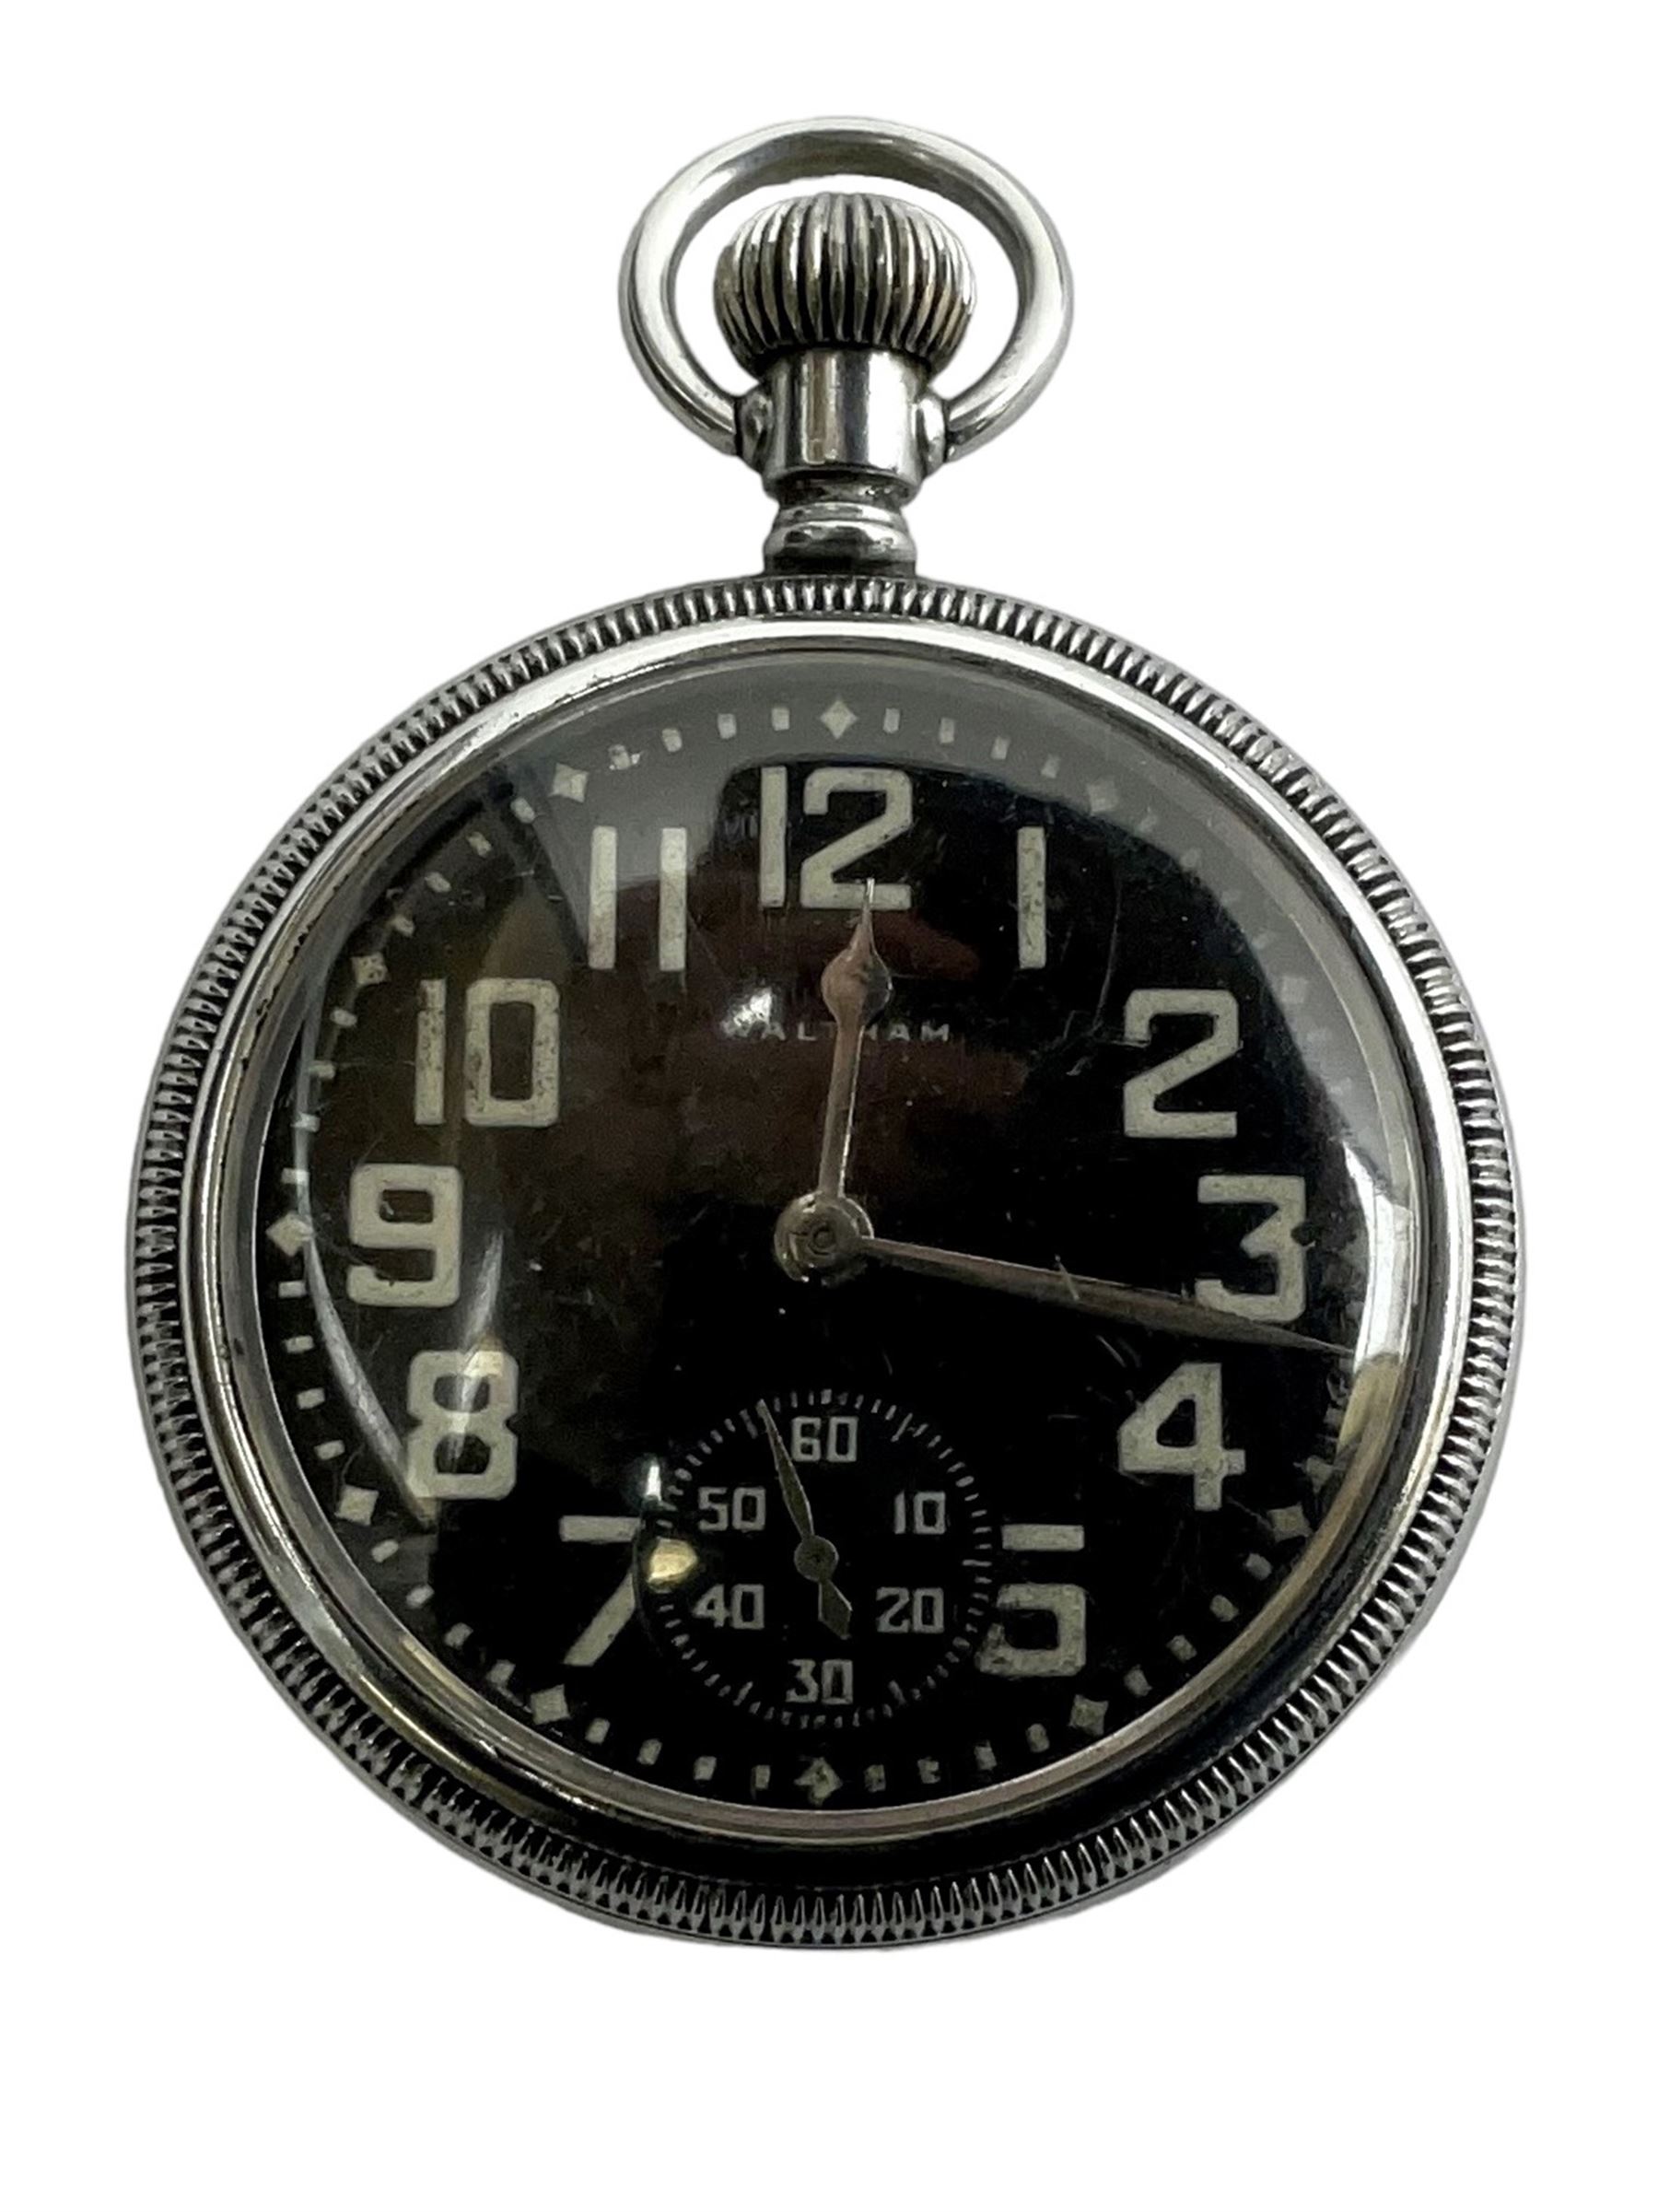 Waltham military open face pocket watch